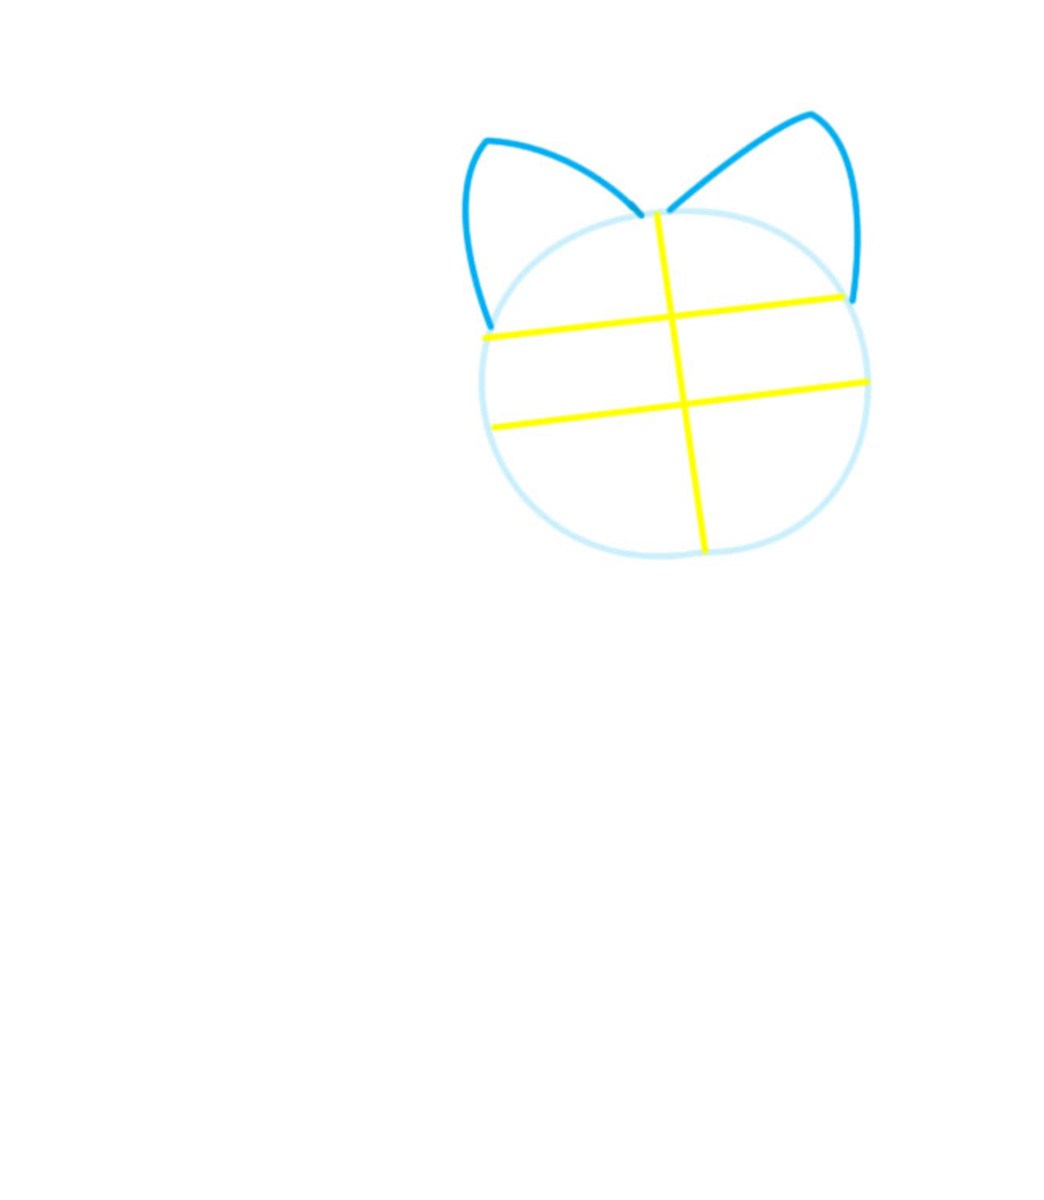 Step 3. Draw the cat's ears.